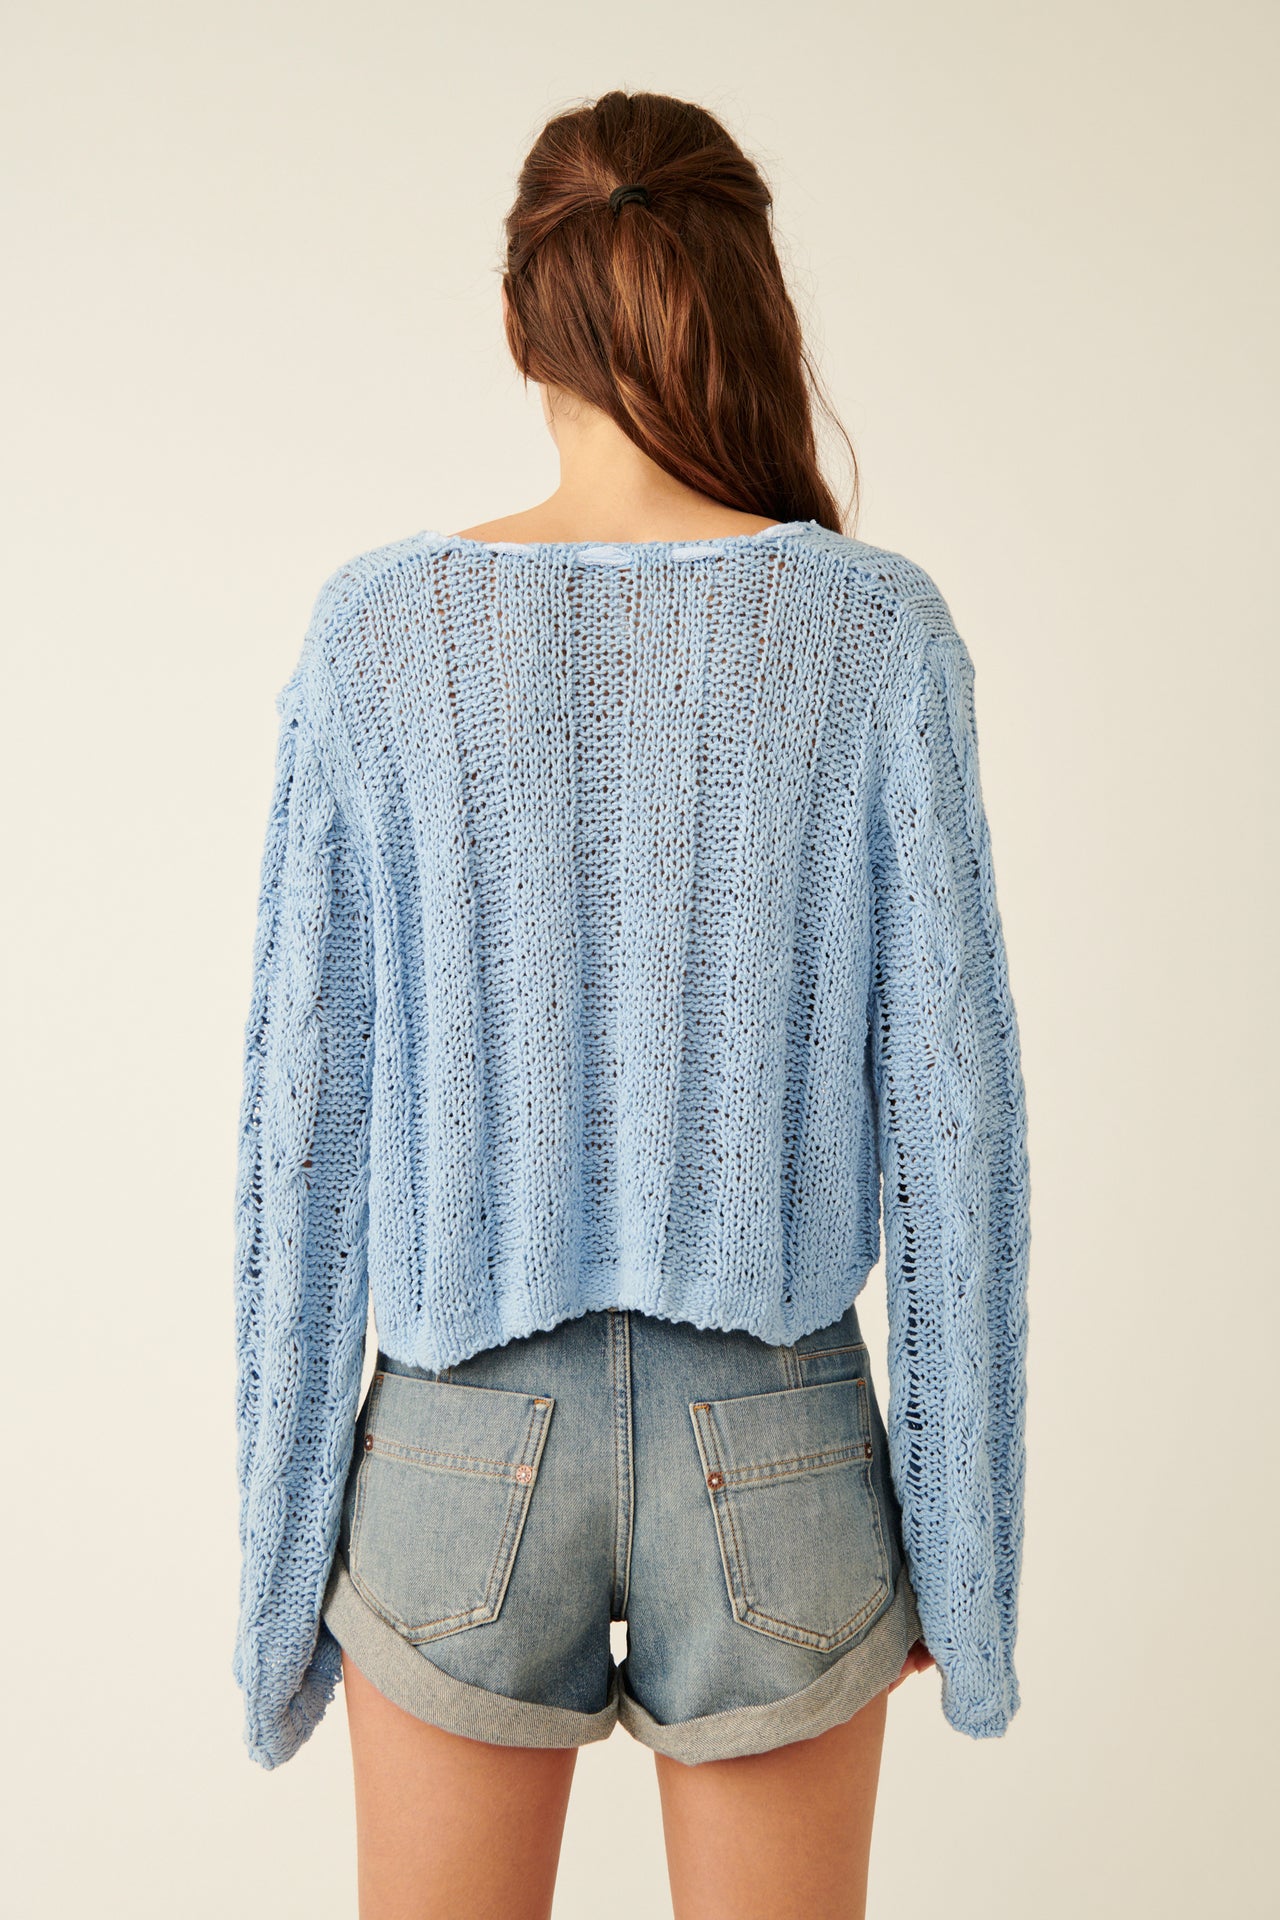 Robyn Cardi Blue Bell, Cardigan Sweater by Free People | LIT Boutique